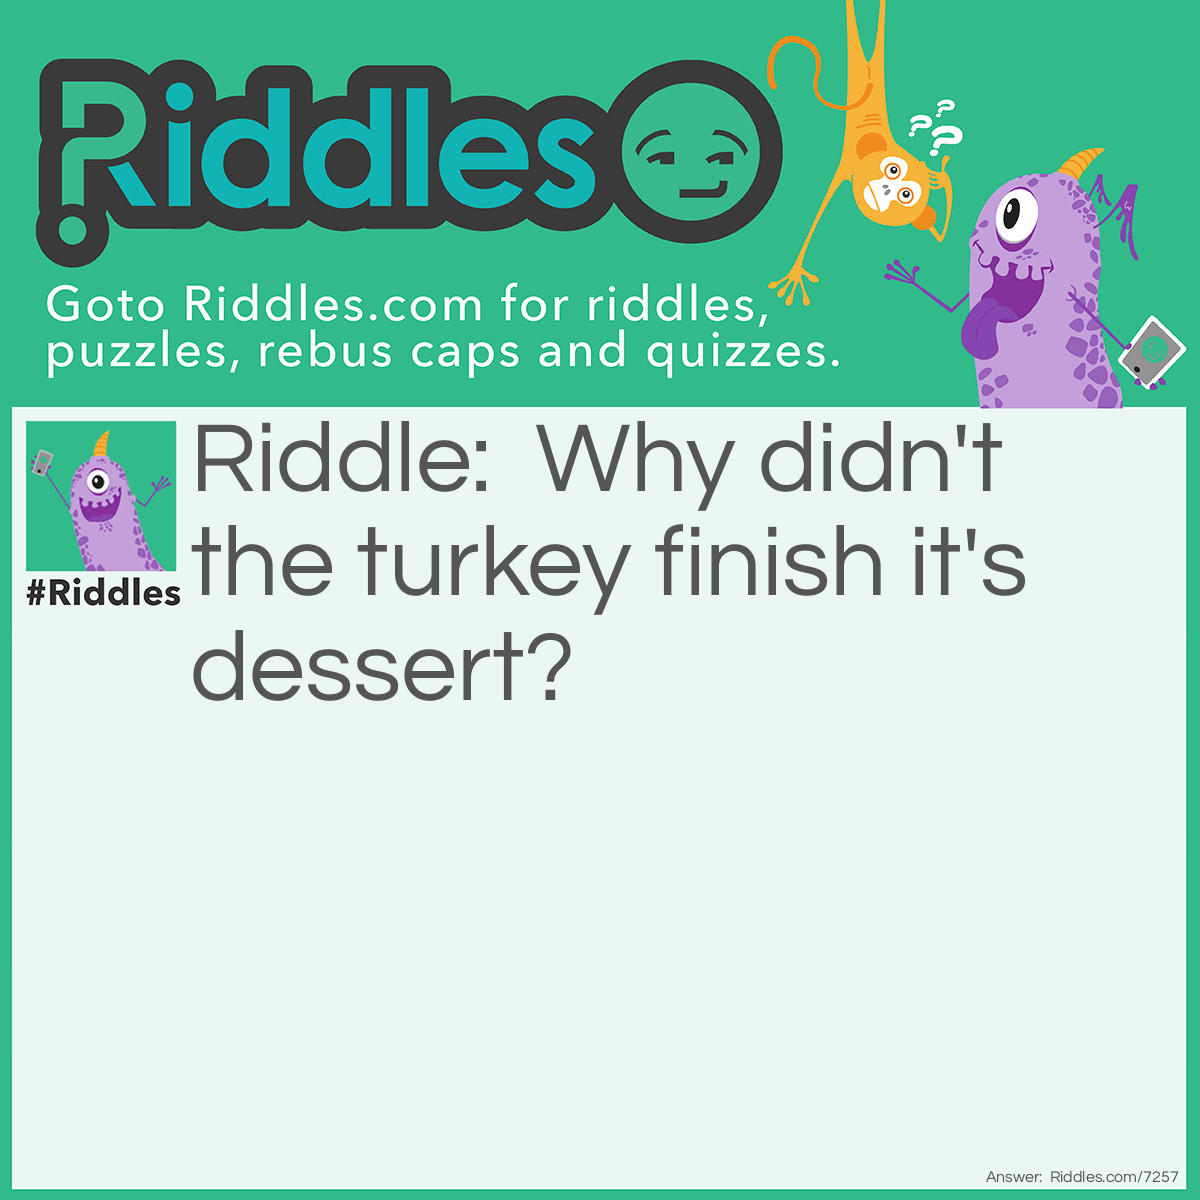 Riddle: Why didn't the turkey finish it's dessert? Answer: Because it was stuffed.